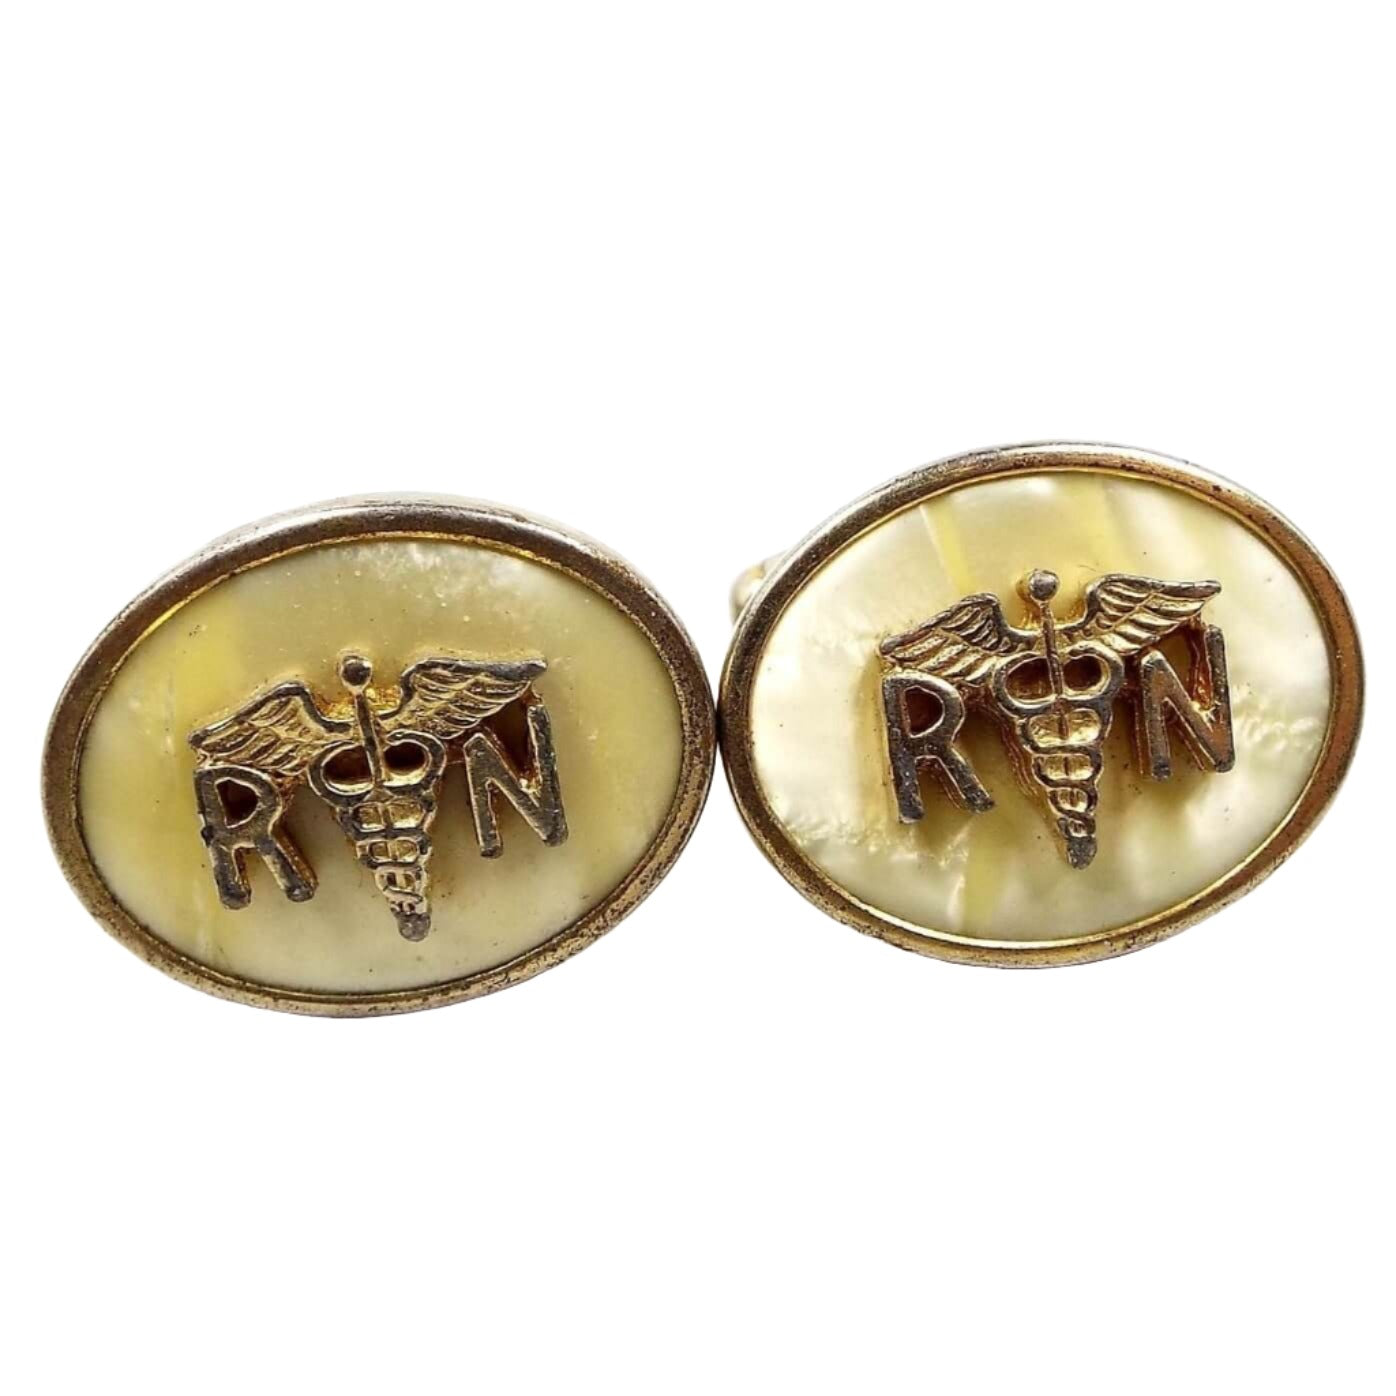 Front view of the Anson Mid Century vintage RN cufflinks. They are oval in shape and the metal is gold tone in color. The inside of the ovals have pearly lucite plastic cabs that are light yellow in color. On top of the lucite cabs is the registered nurse symbol with the letter R and N separated by the Caduceus medical emblem of two snakes entwined around a winged staff. 